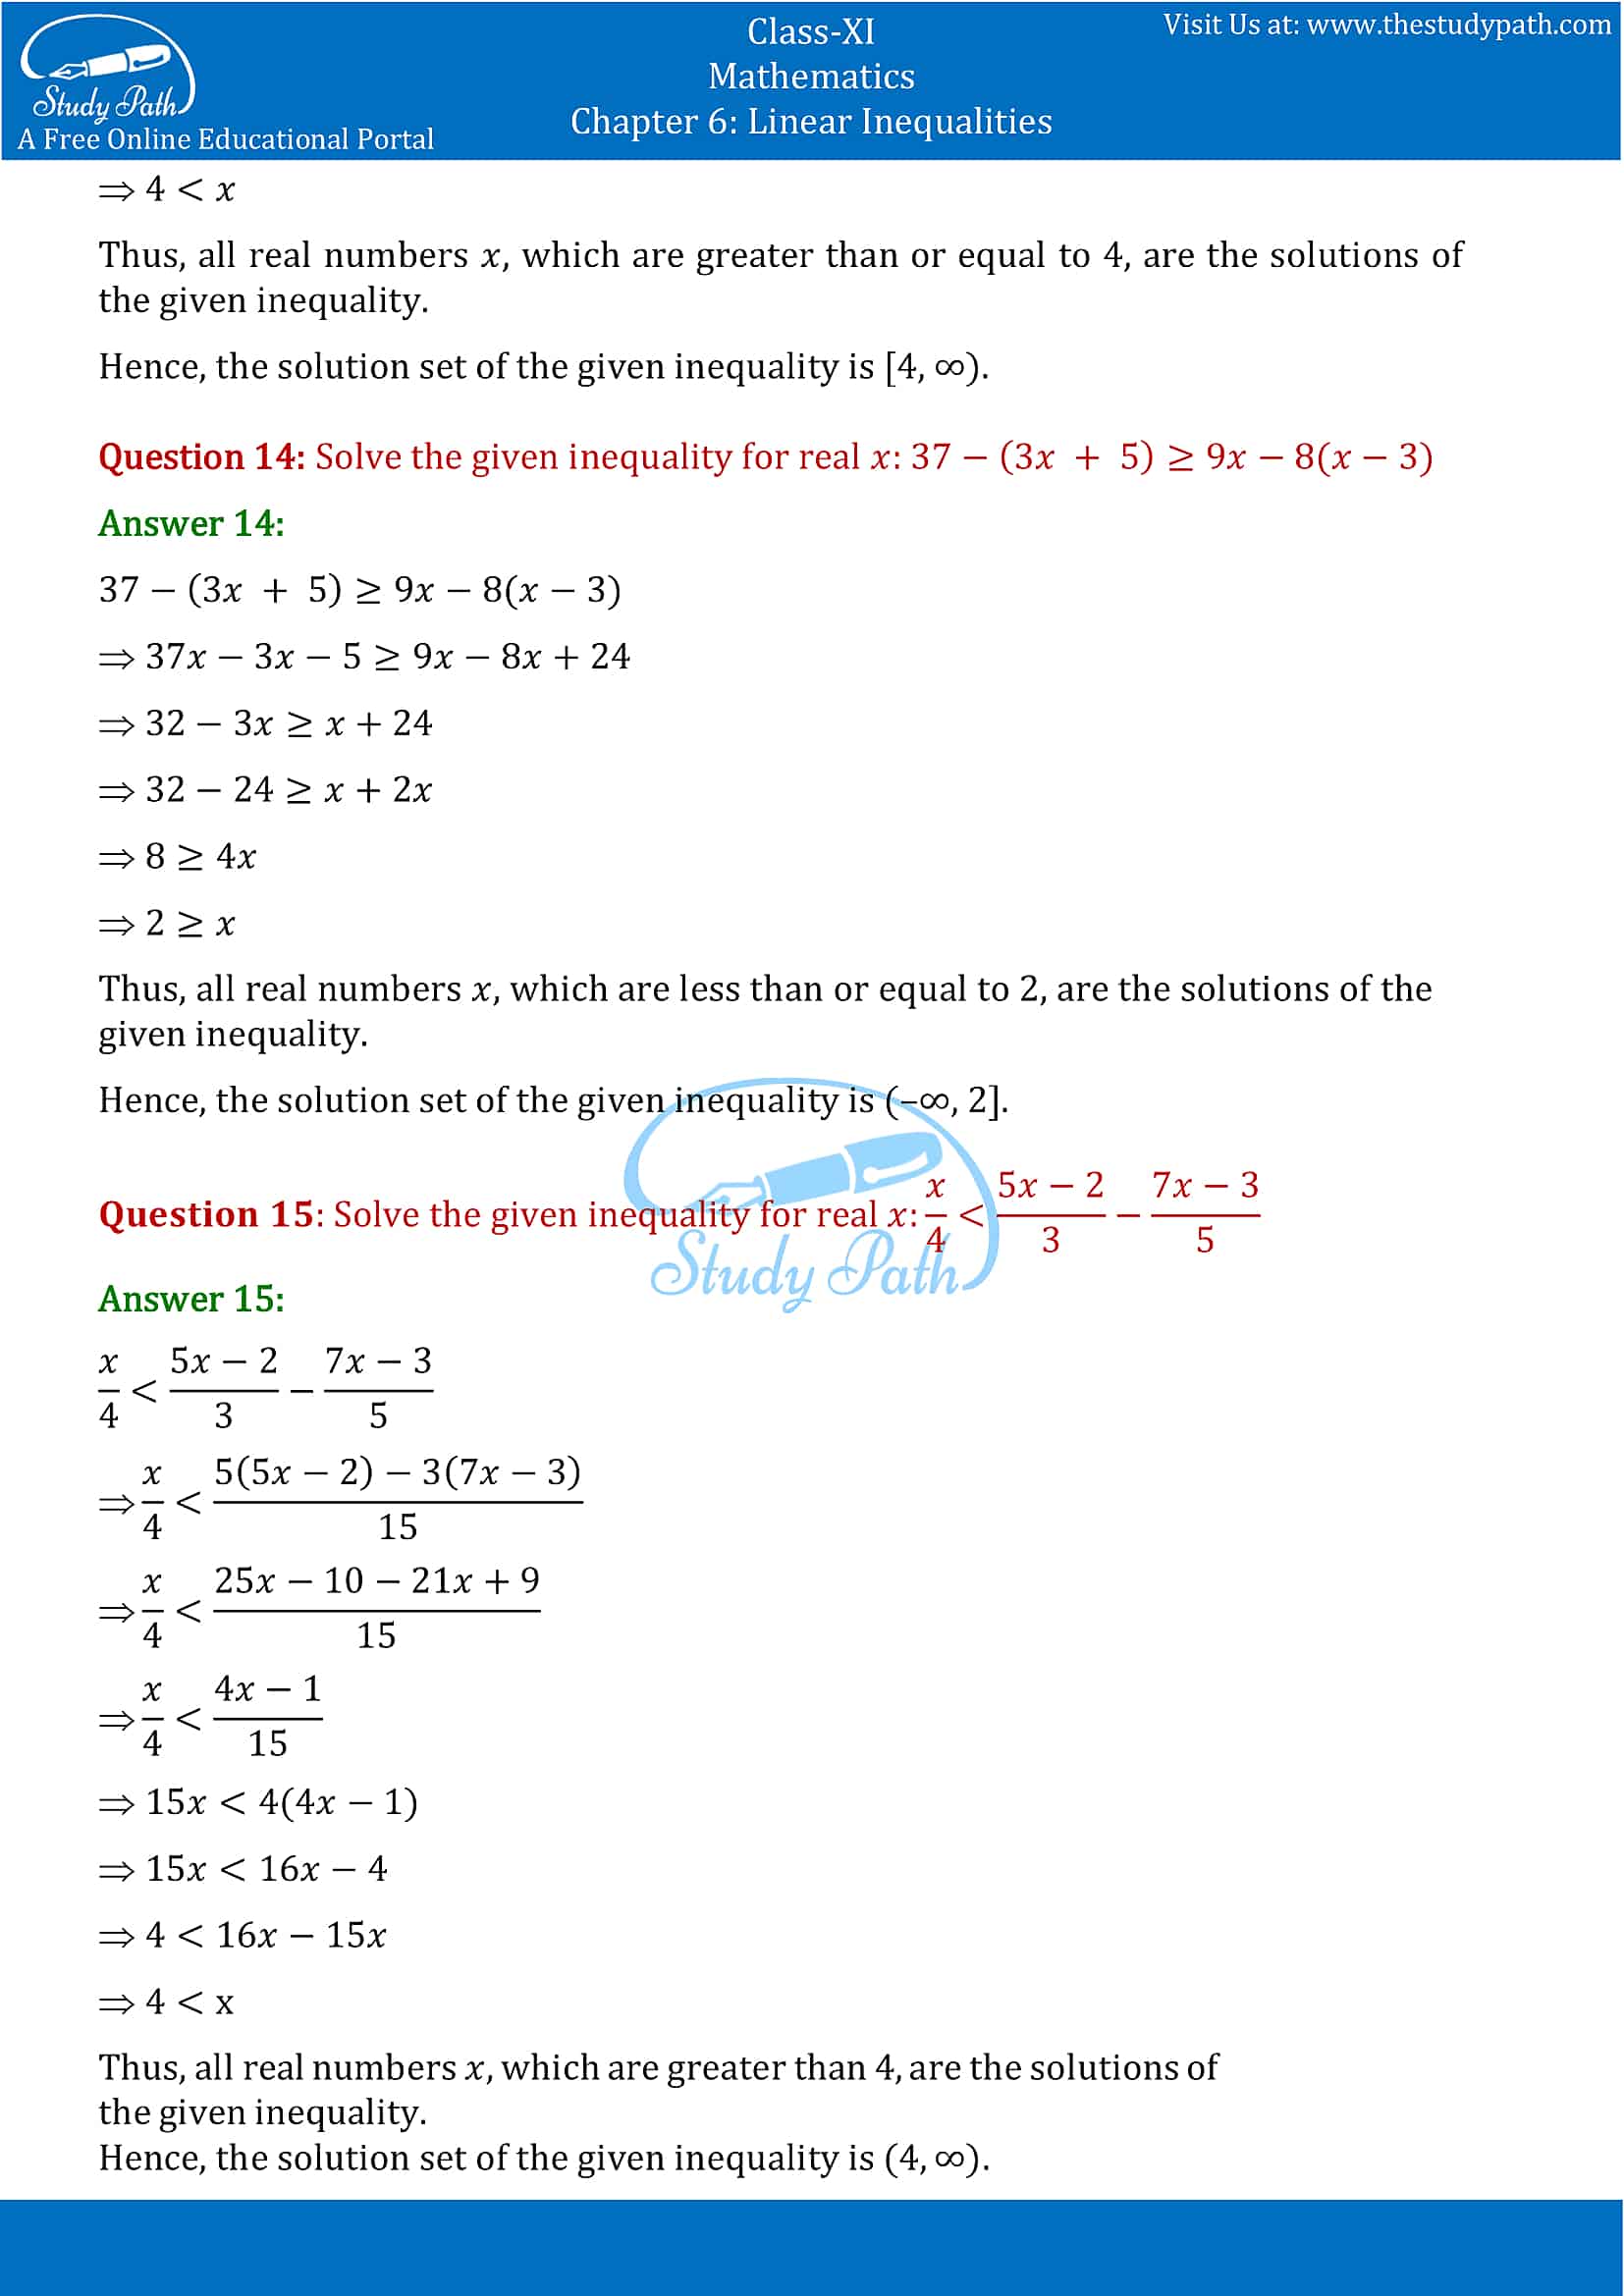 NCERT Solutions for Class 11 Maths chapter 6 Linear Inequalities Part-7